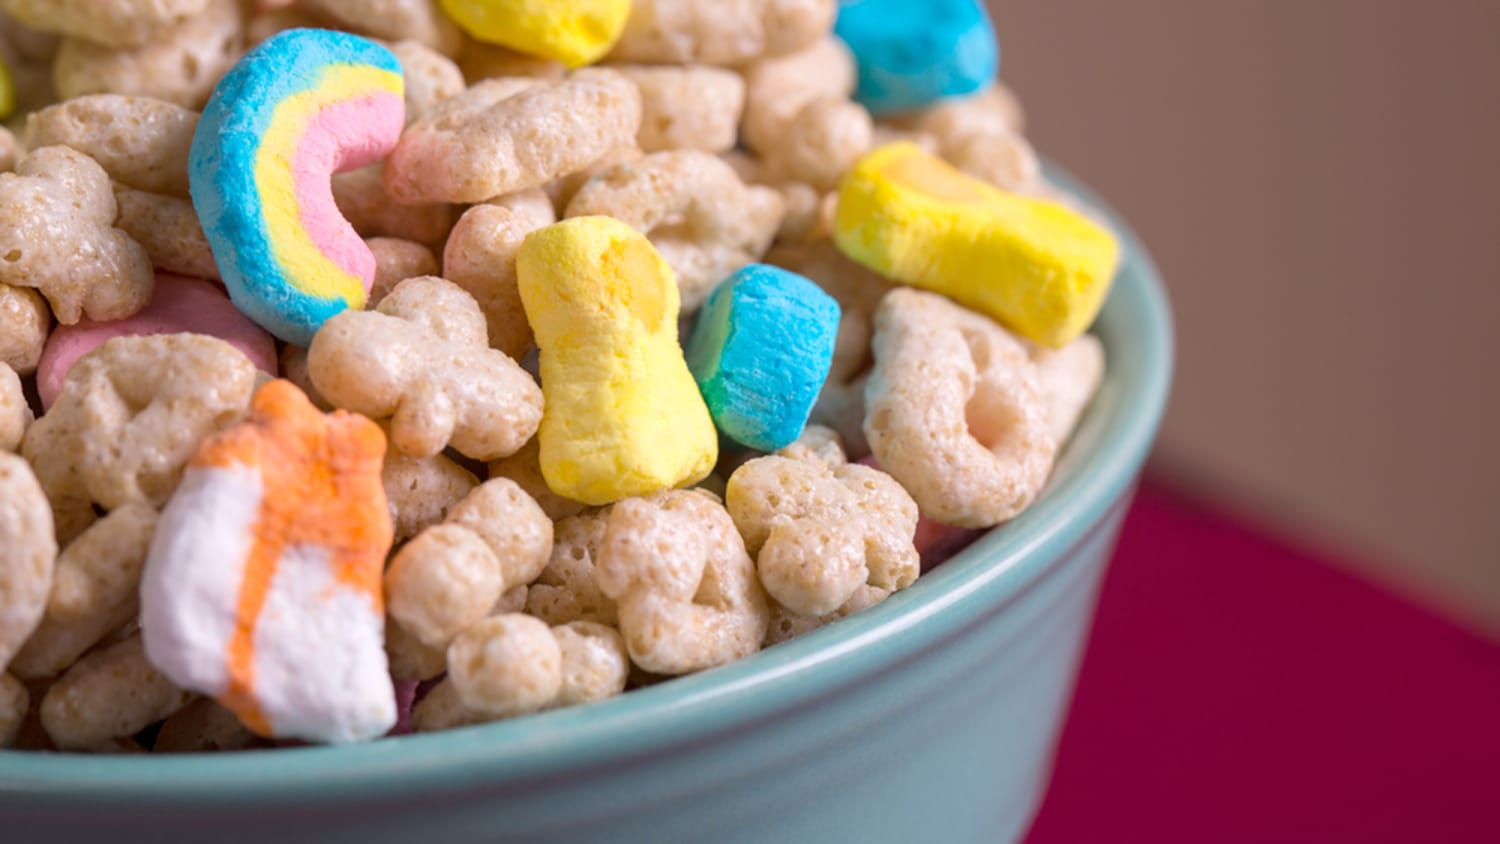 What is in Lucky Charms marshmallows?